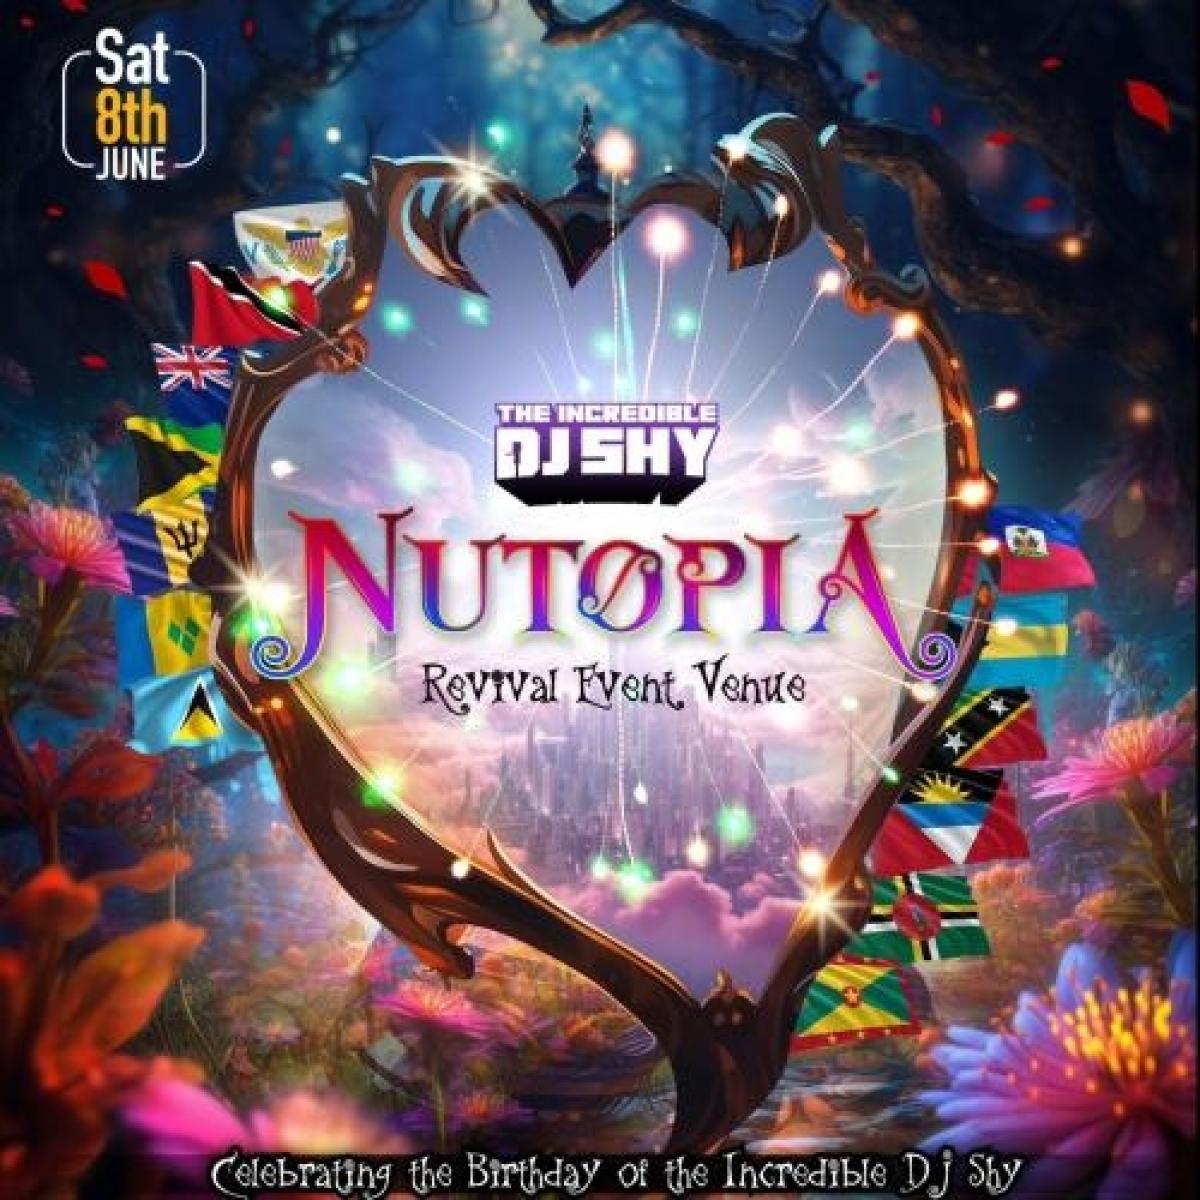 Nutopia flyer or graphic.